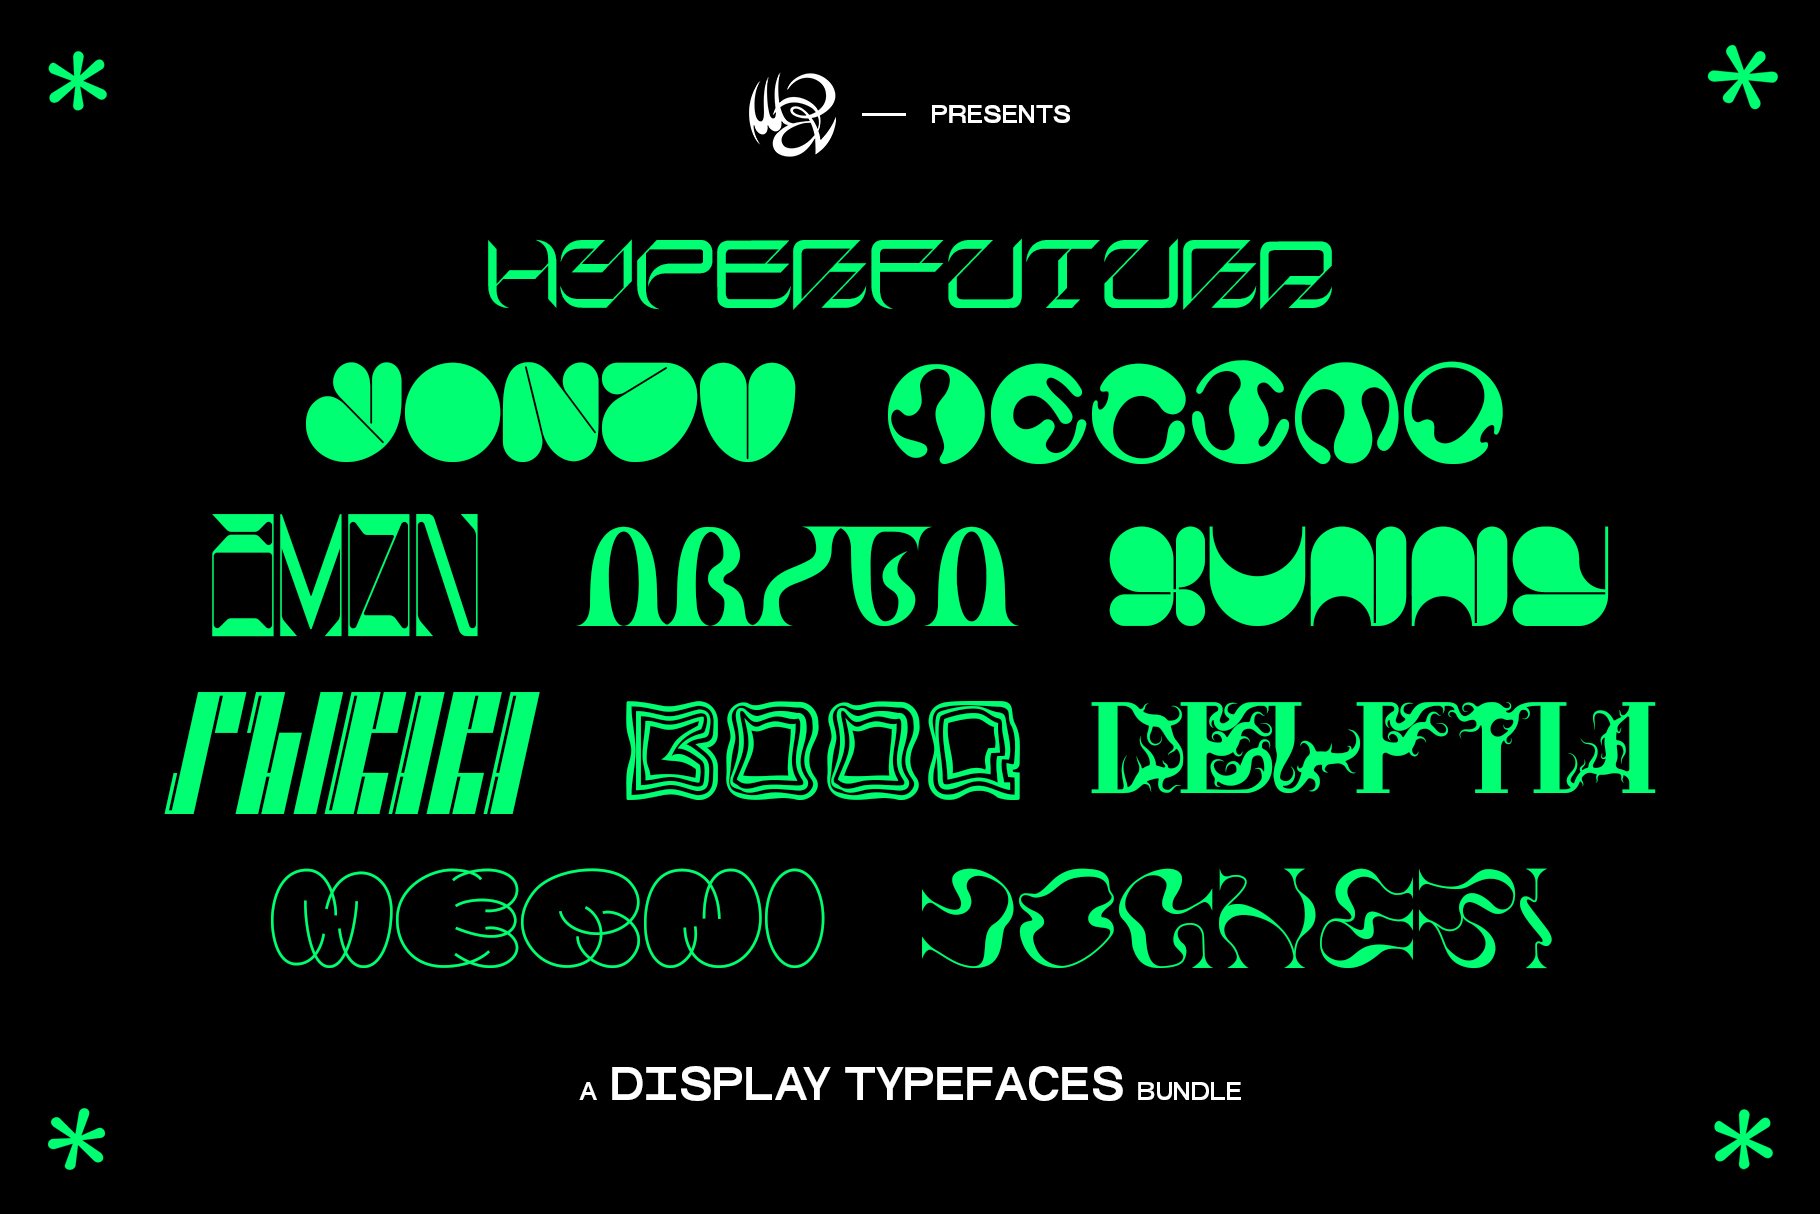 DISPLAY TYPEFACES MEGAPACK 1 cover image.